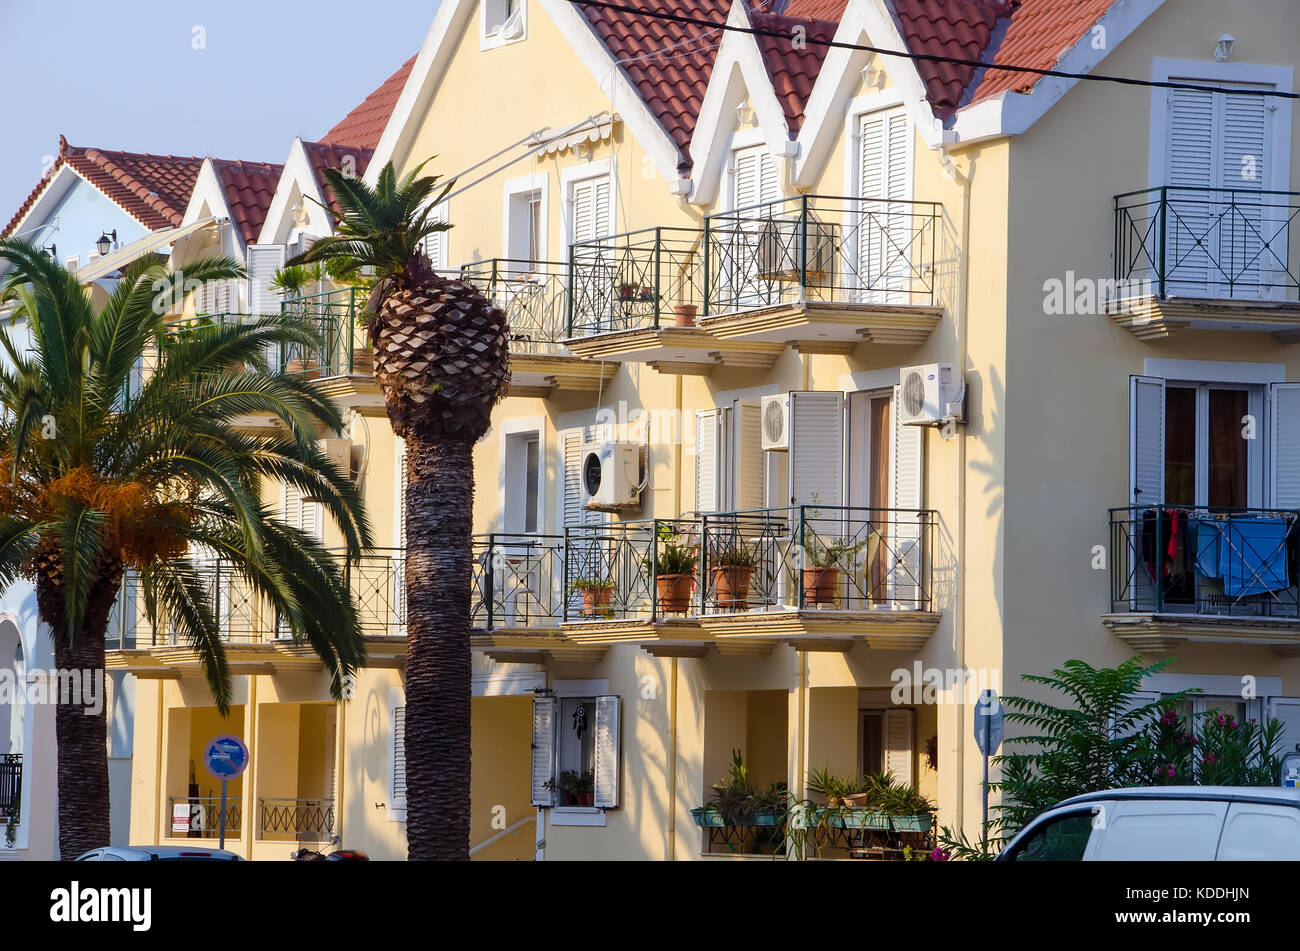 Two-story residential housing in summer tourist city of Argostoli, Kefalonia, cephalonia, Ionian Islands, Greece Stock Photo